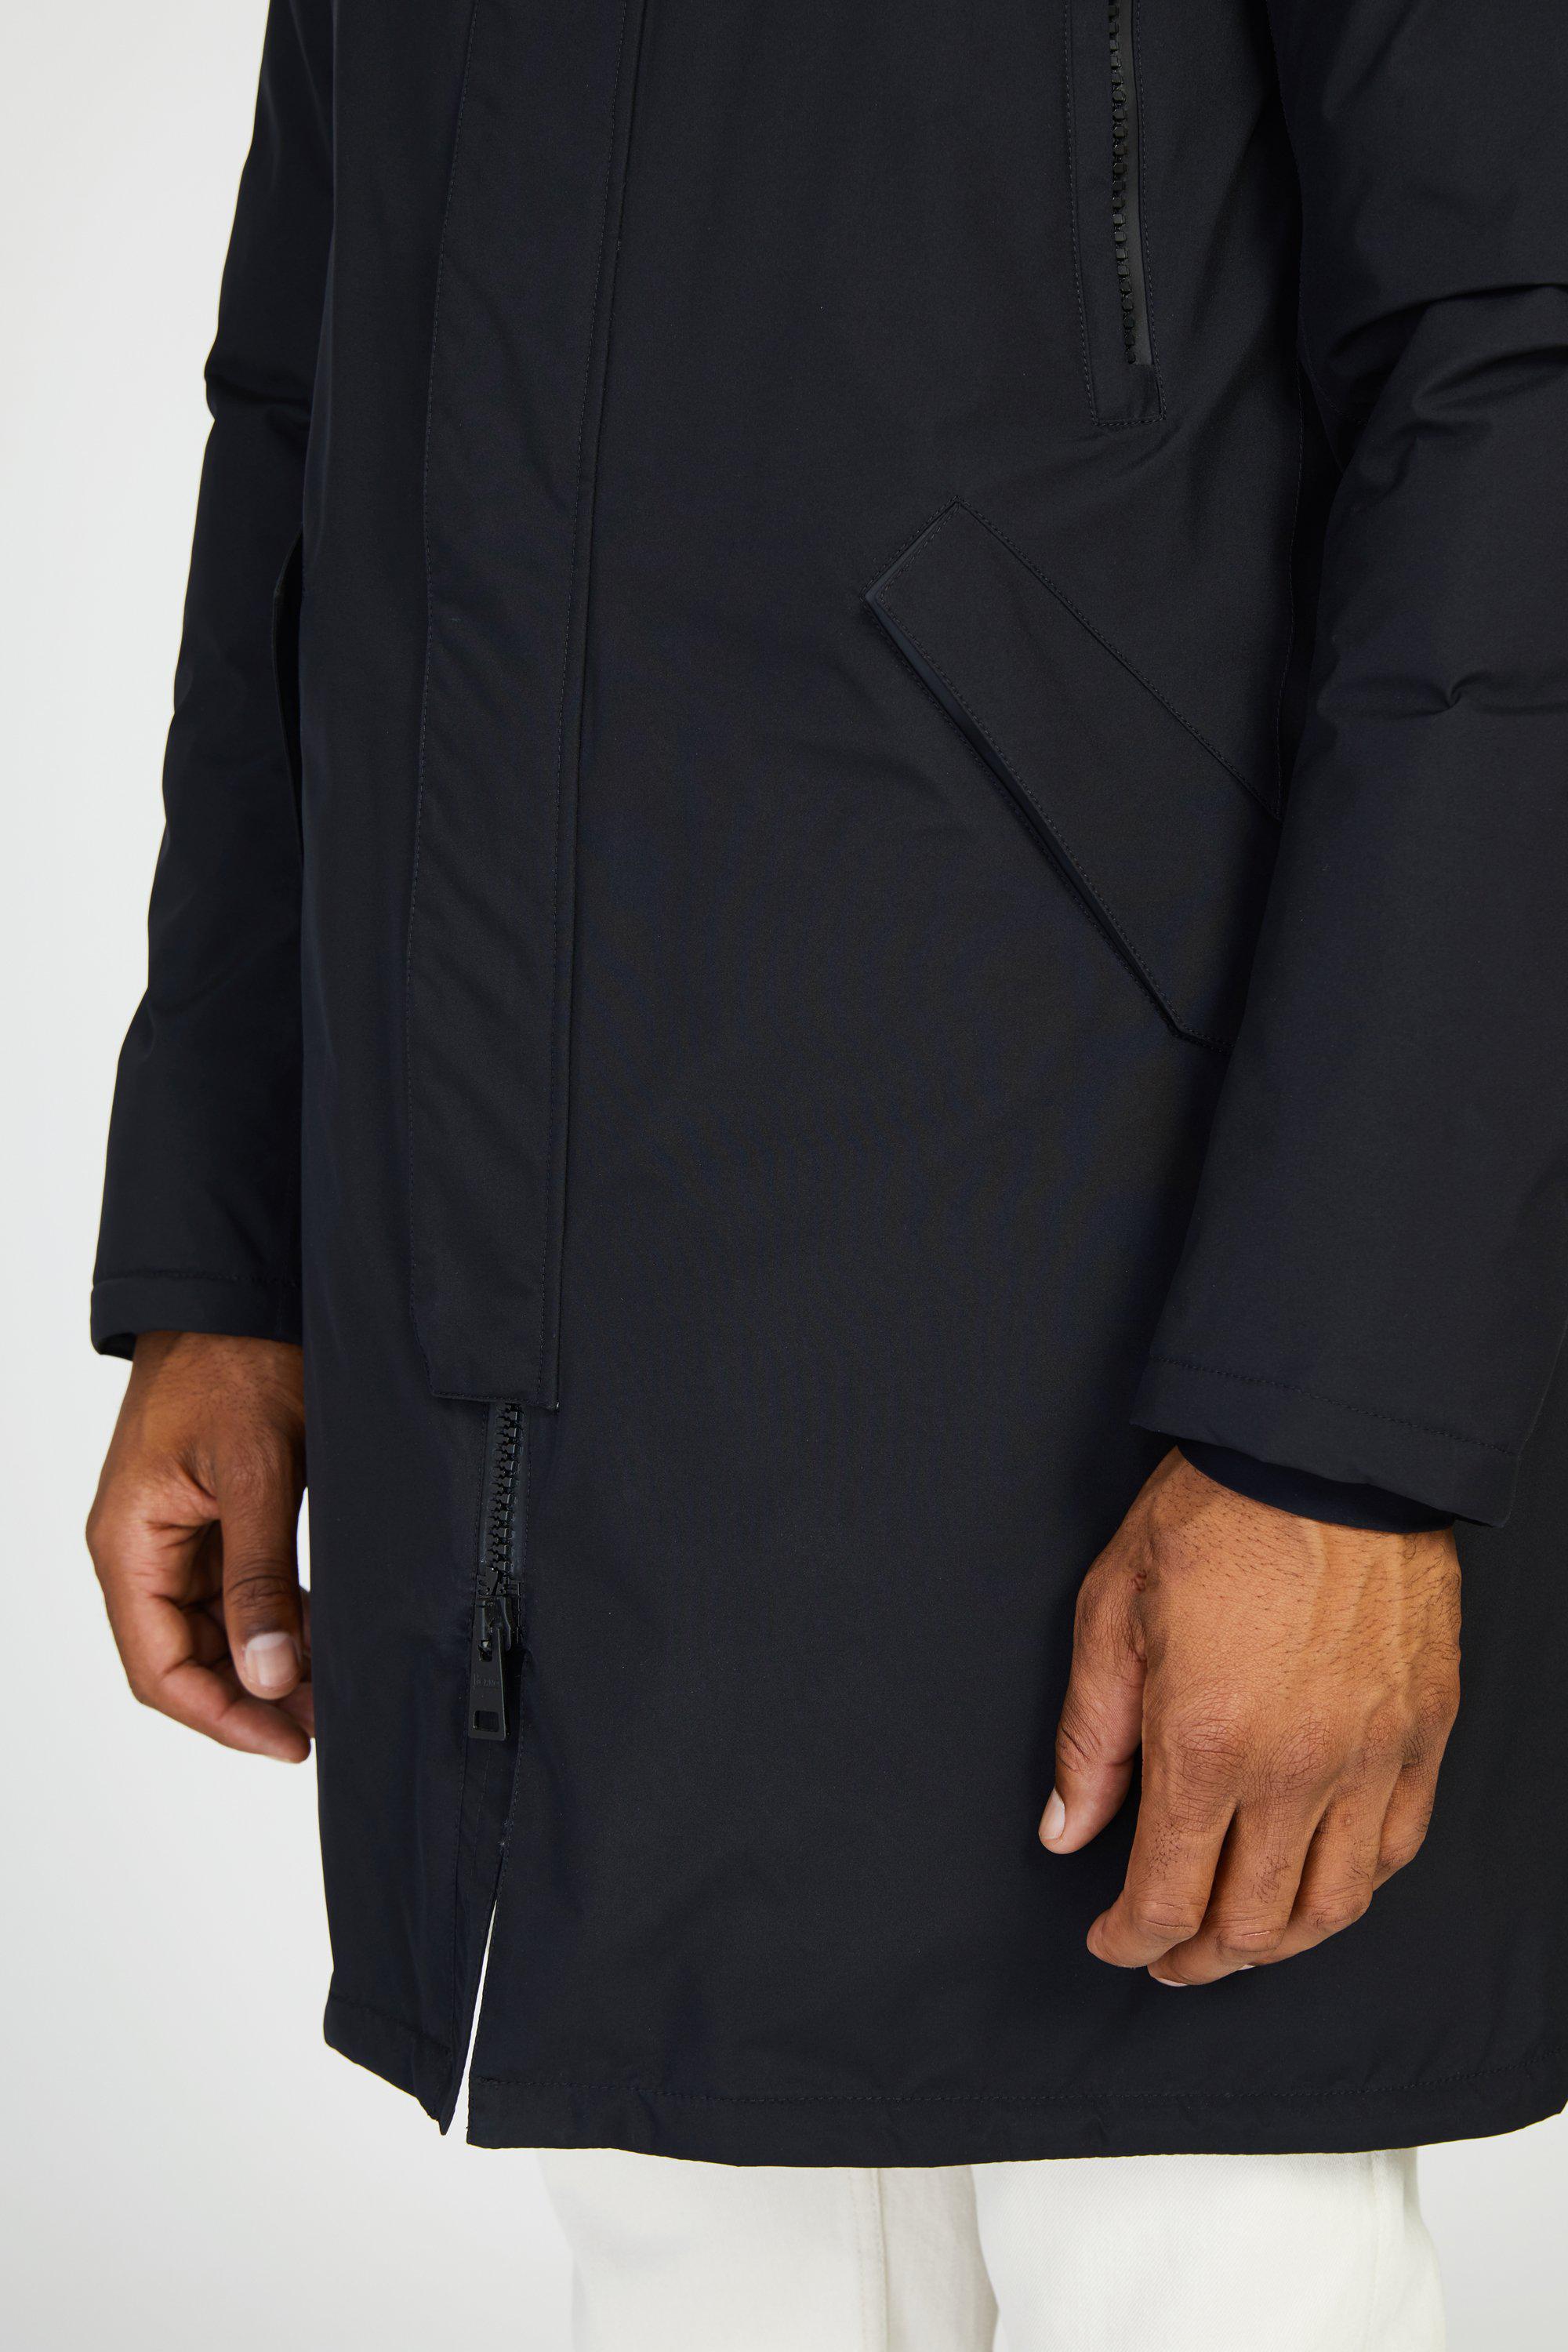 Herno Laminar Goretex Down Parka With Removable Hood in Black for 